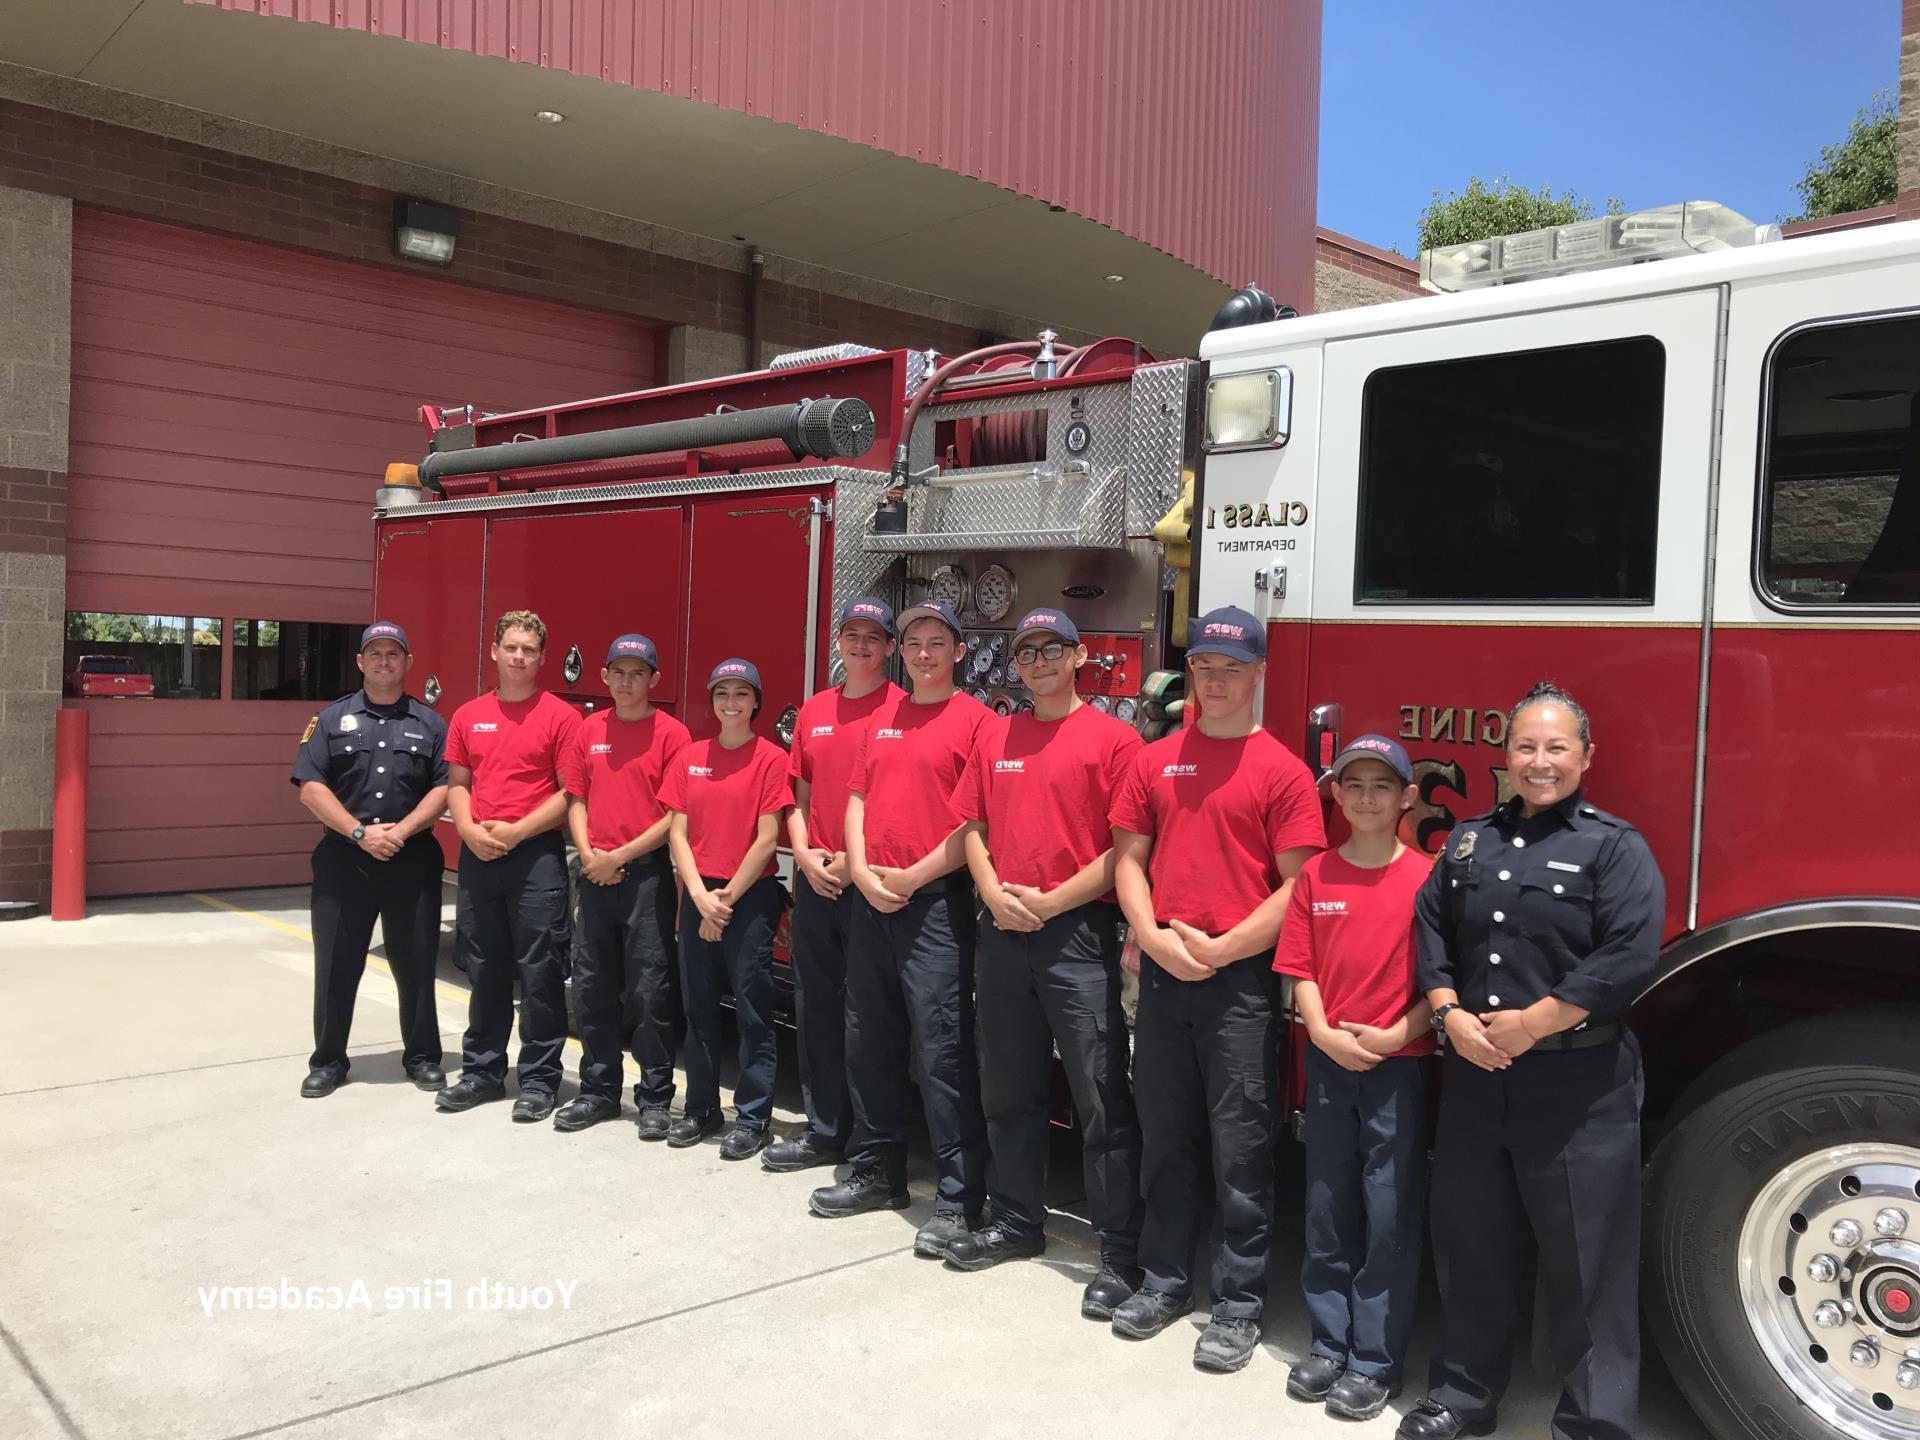 Youth Fire Academy text